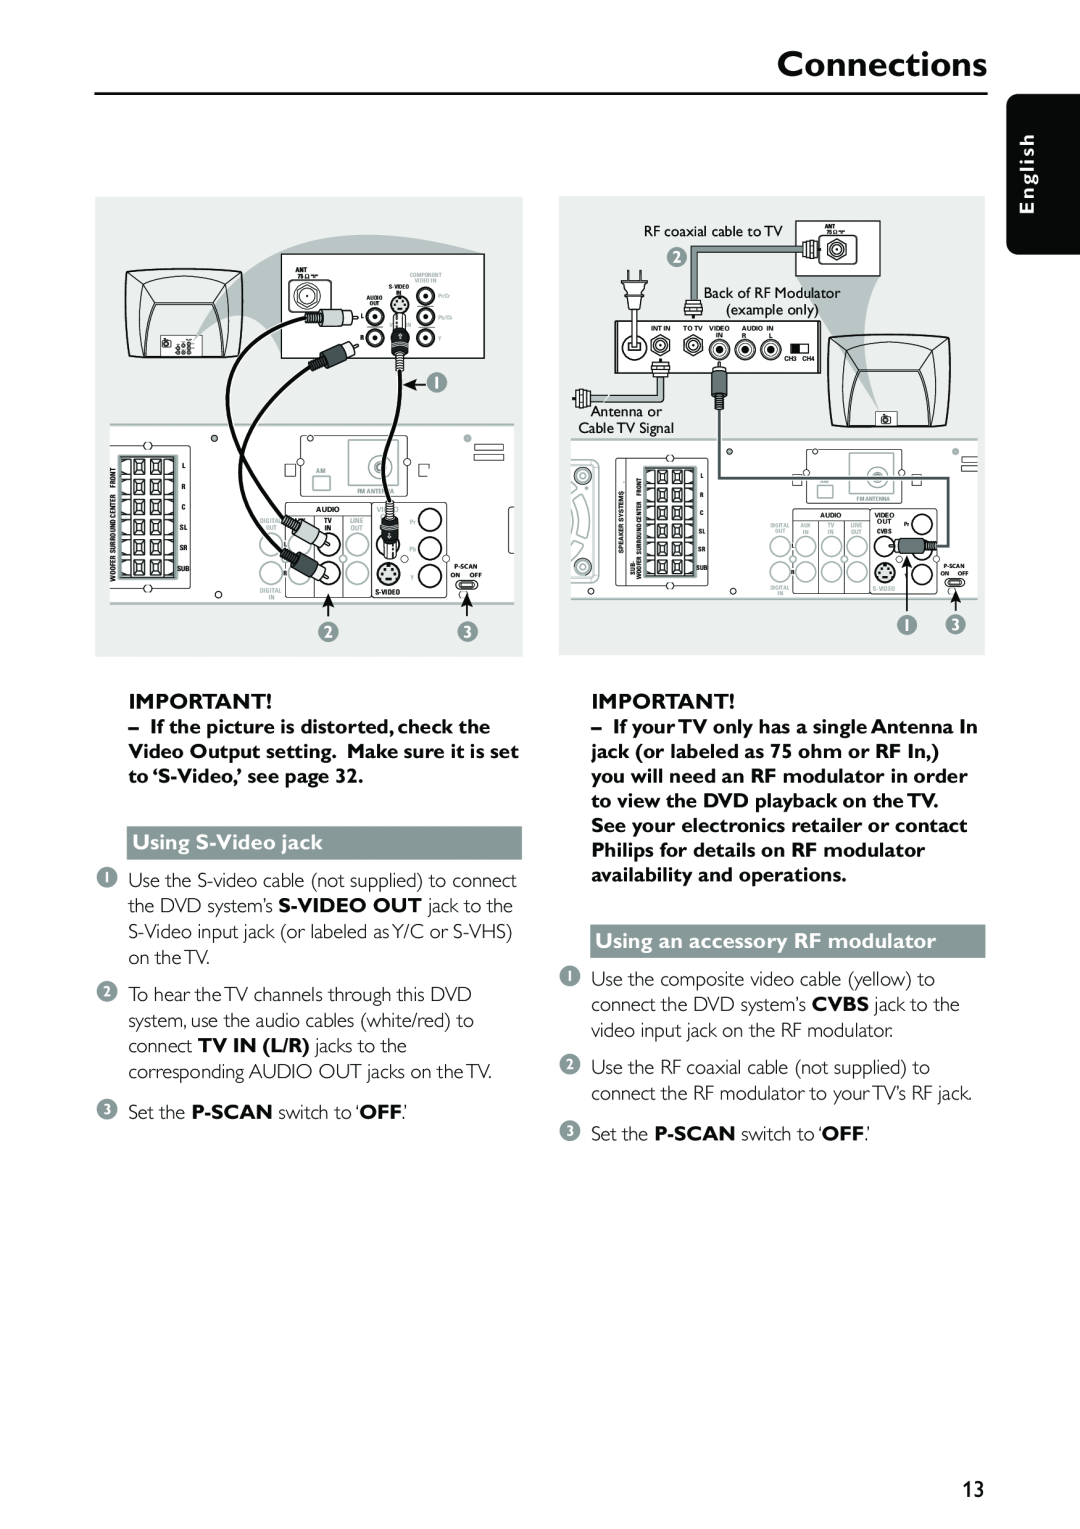 Philips MX5500D owner manual Connections, E n g l i s h, Using S-Videojack, Set the P-SCAN switch to ‘OFF.’ 